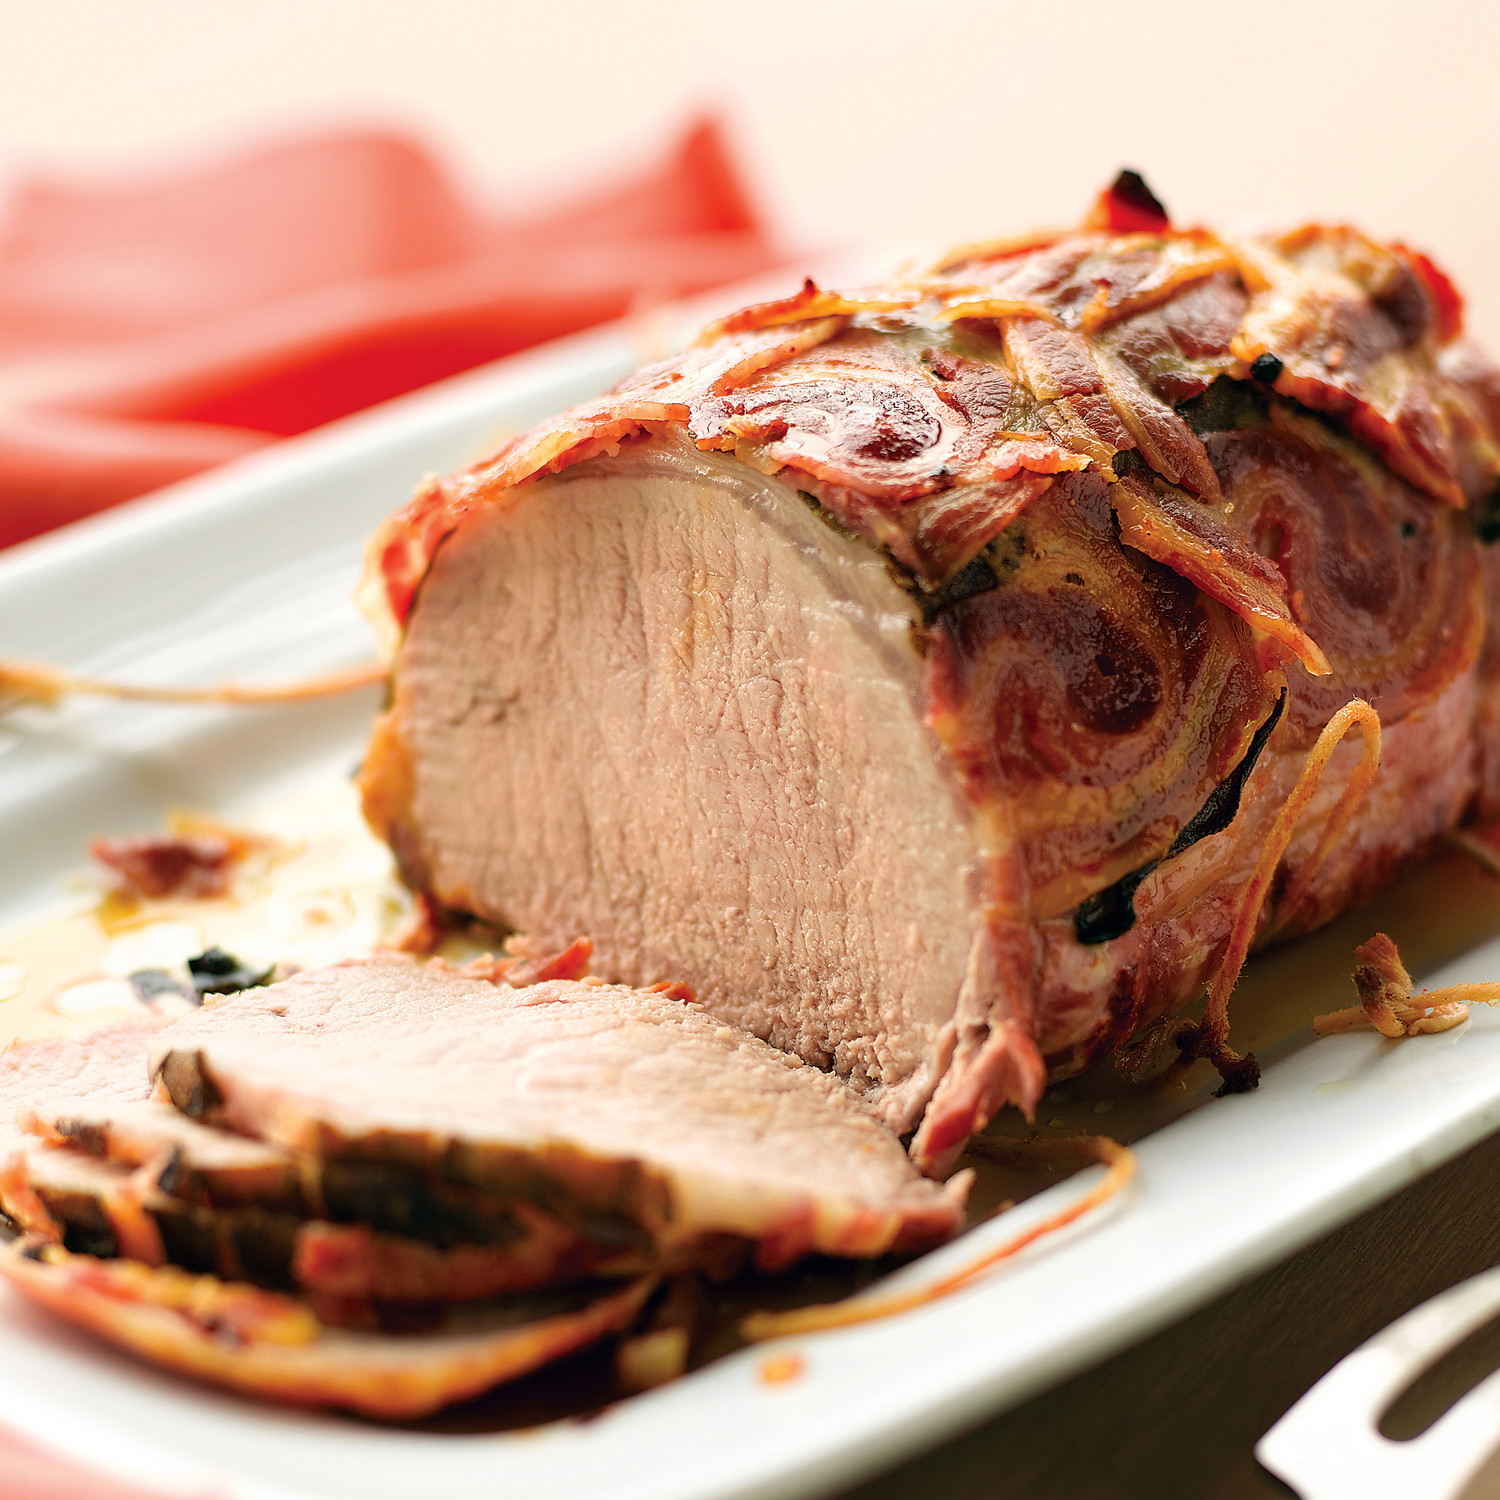 New Years Day Dinner Ideas
 Roast Pork Loin with Pancetta and Sage